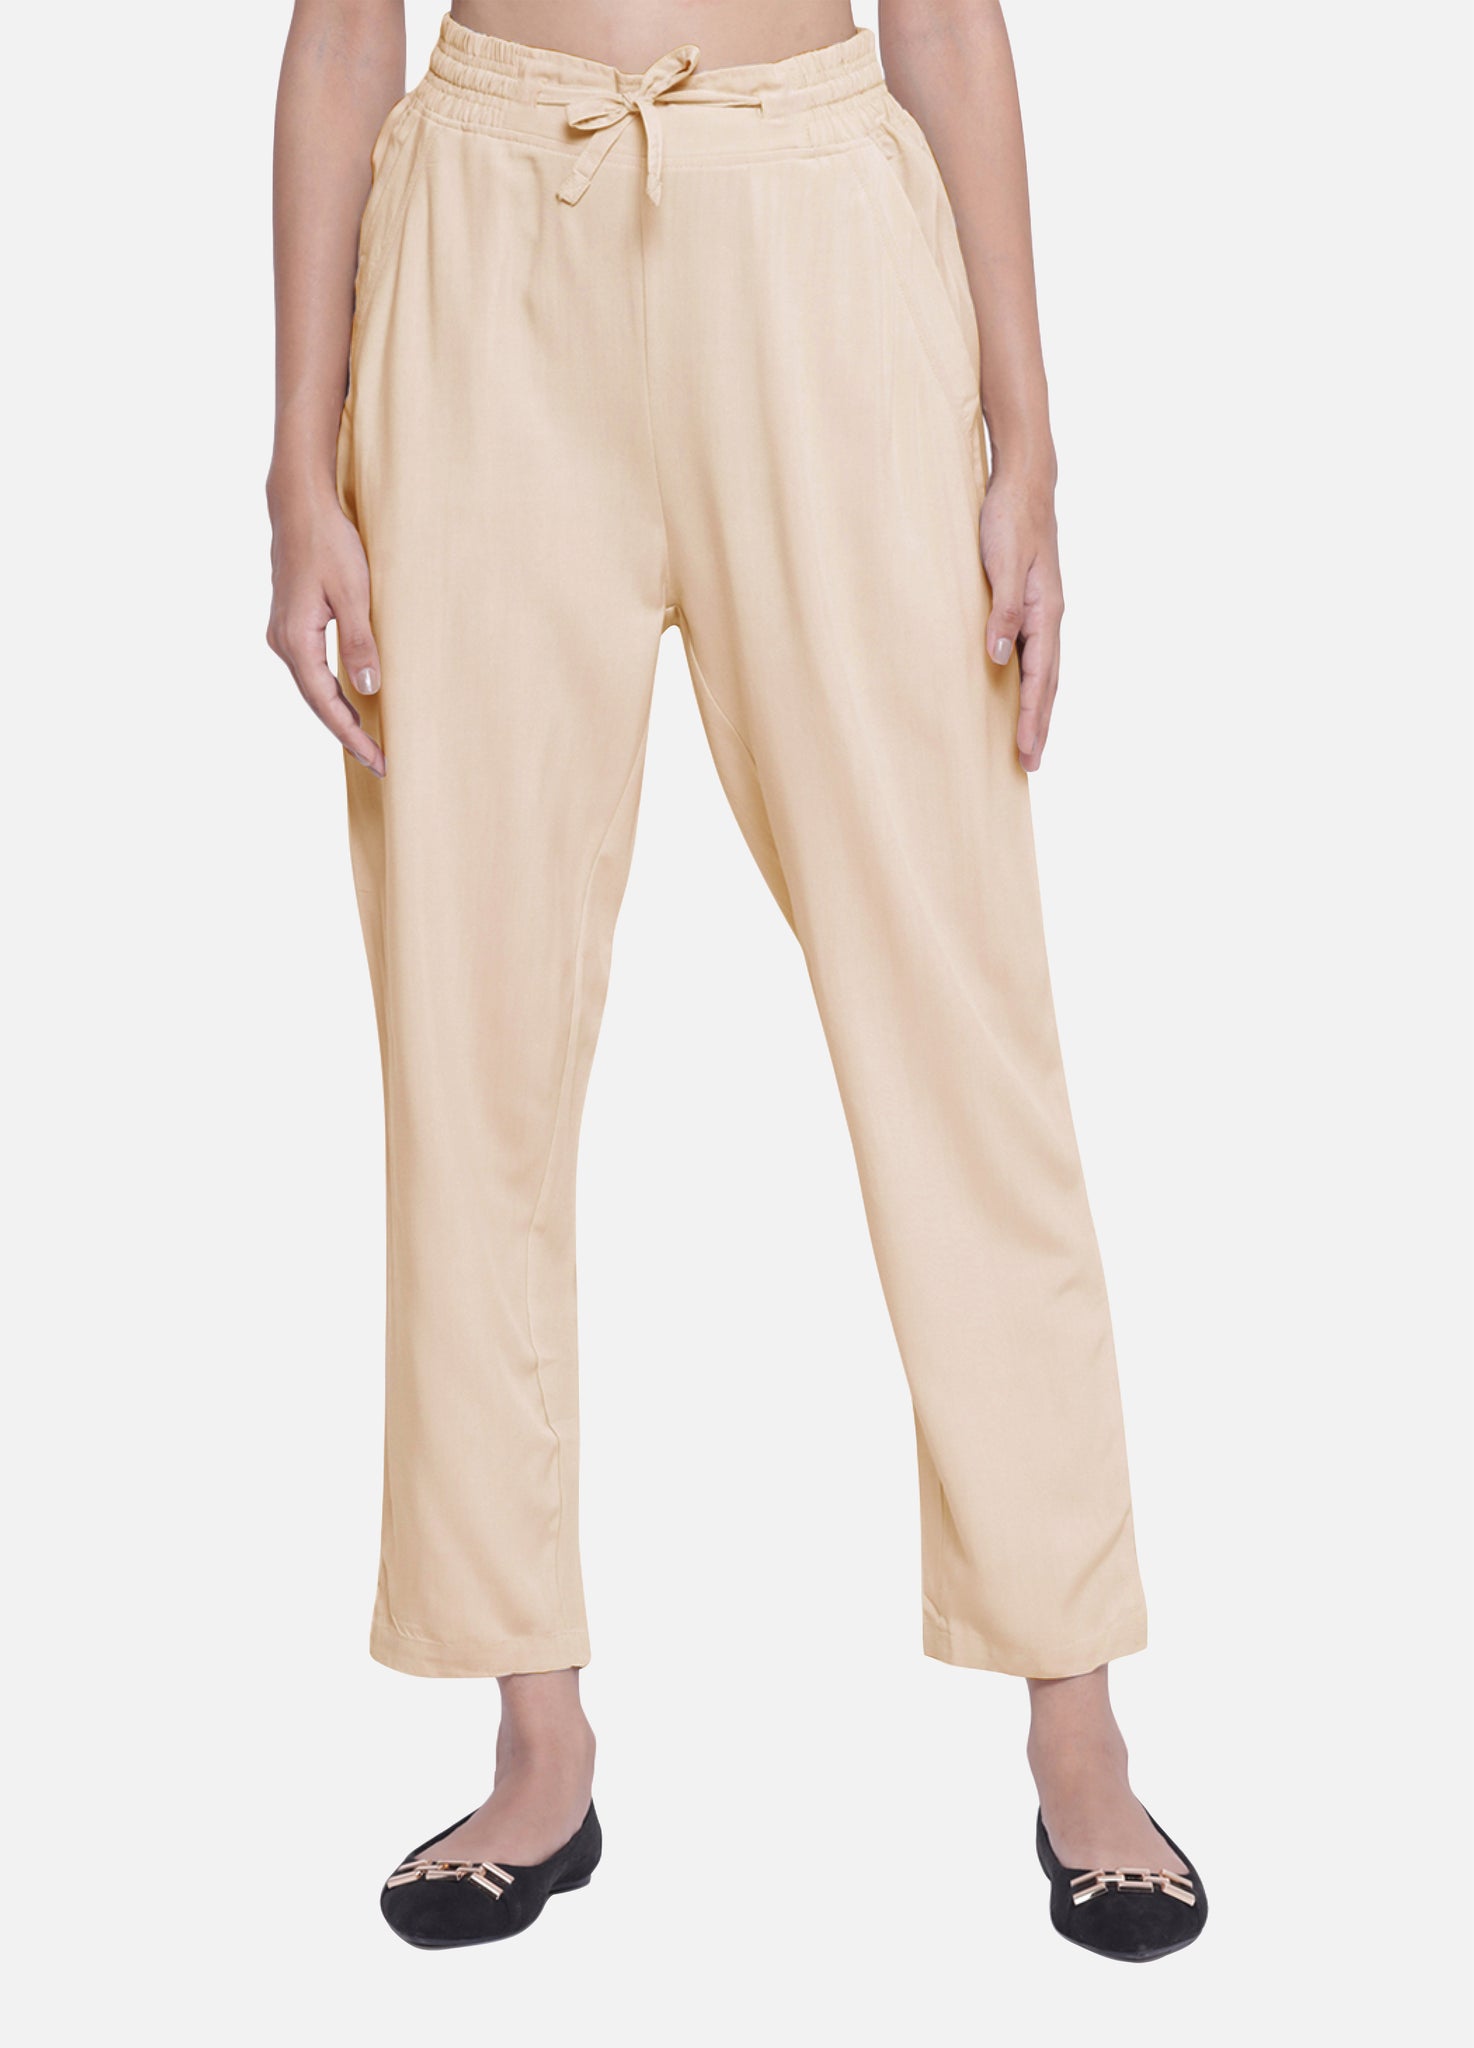 WHITE CIGARETTE PANTS WITH GOLDEN BUTTONS - TARANKO